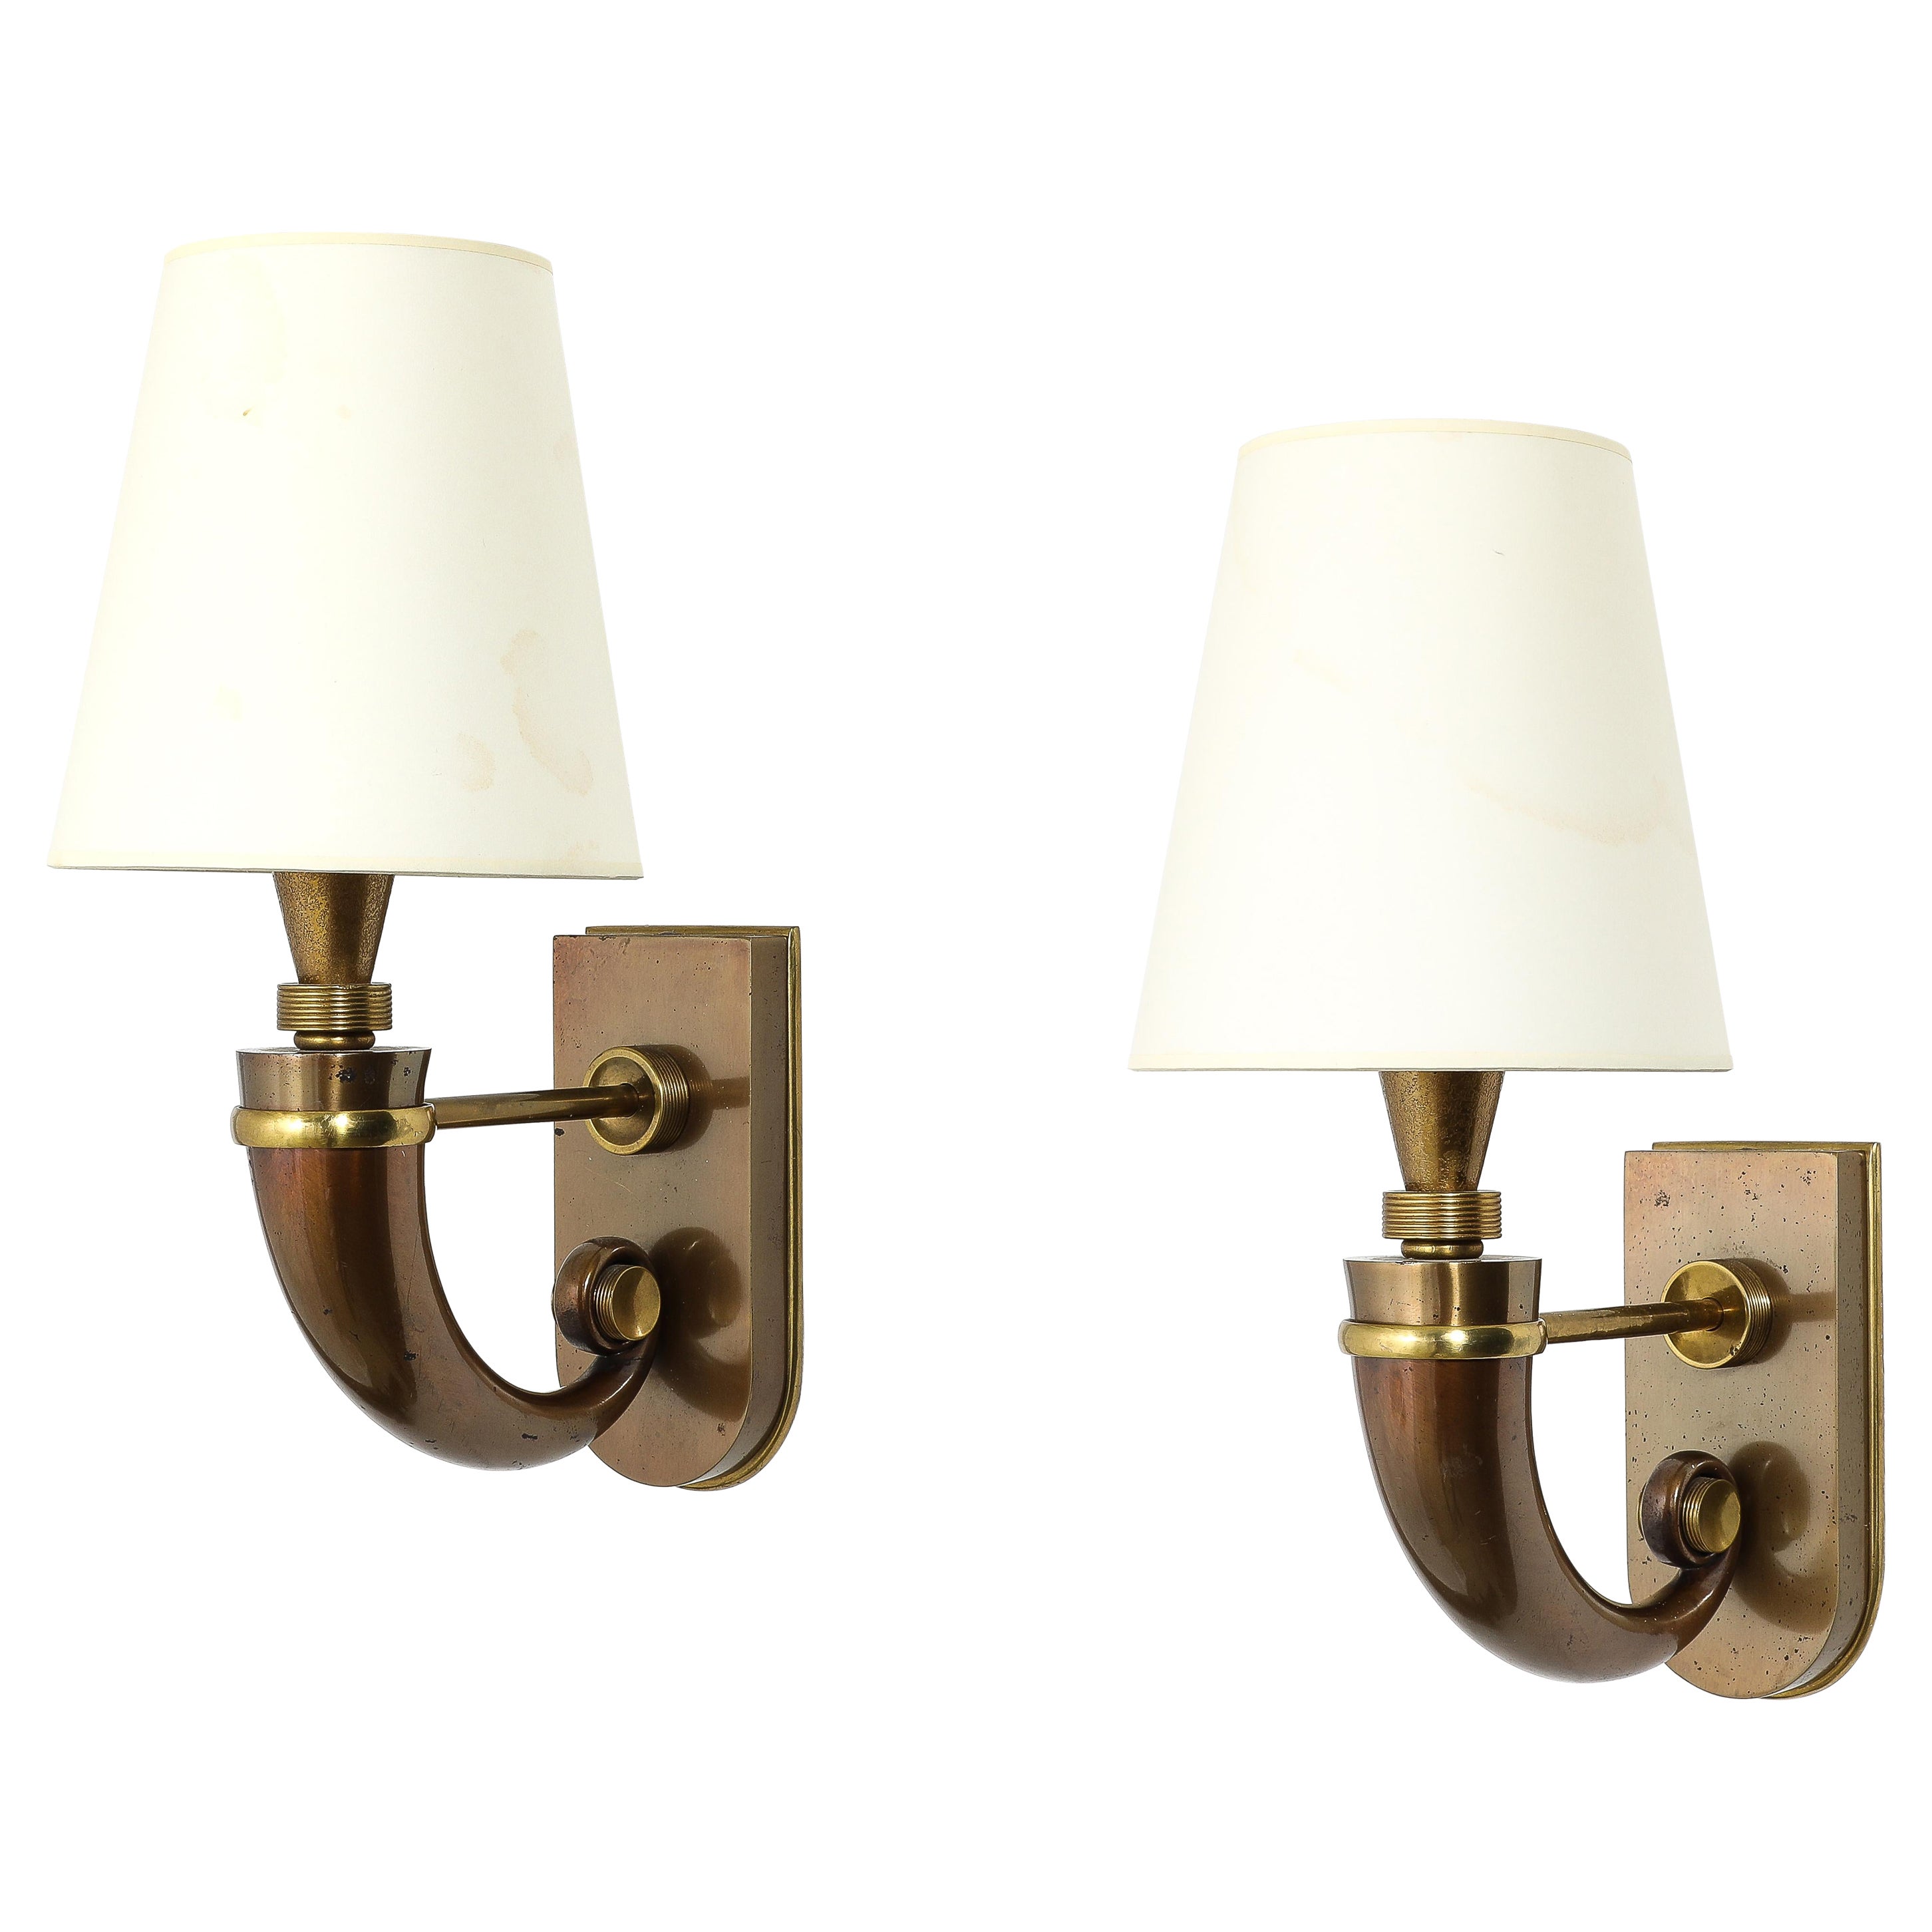 Art Deco Maison Jansen Style Sconces in Patinated Mixed Metals, France 1930’s For Sale